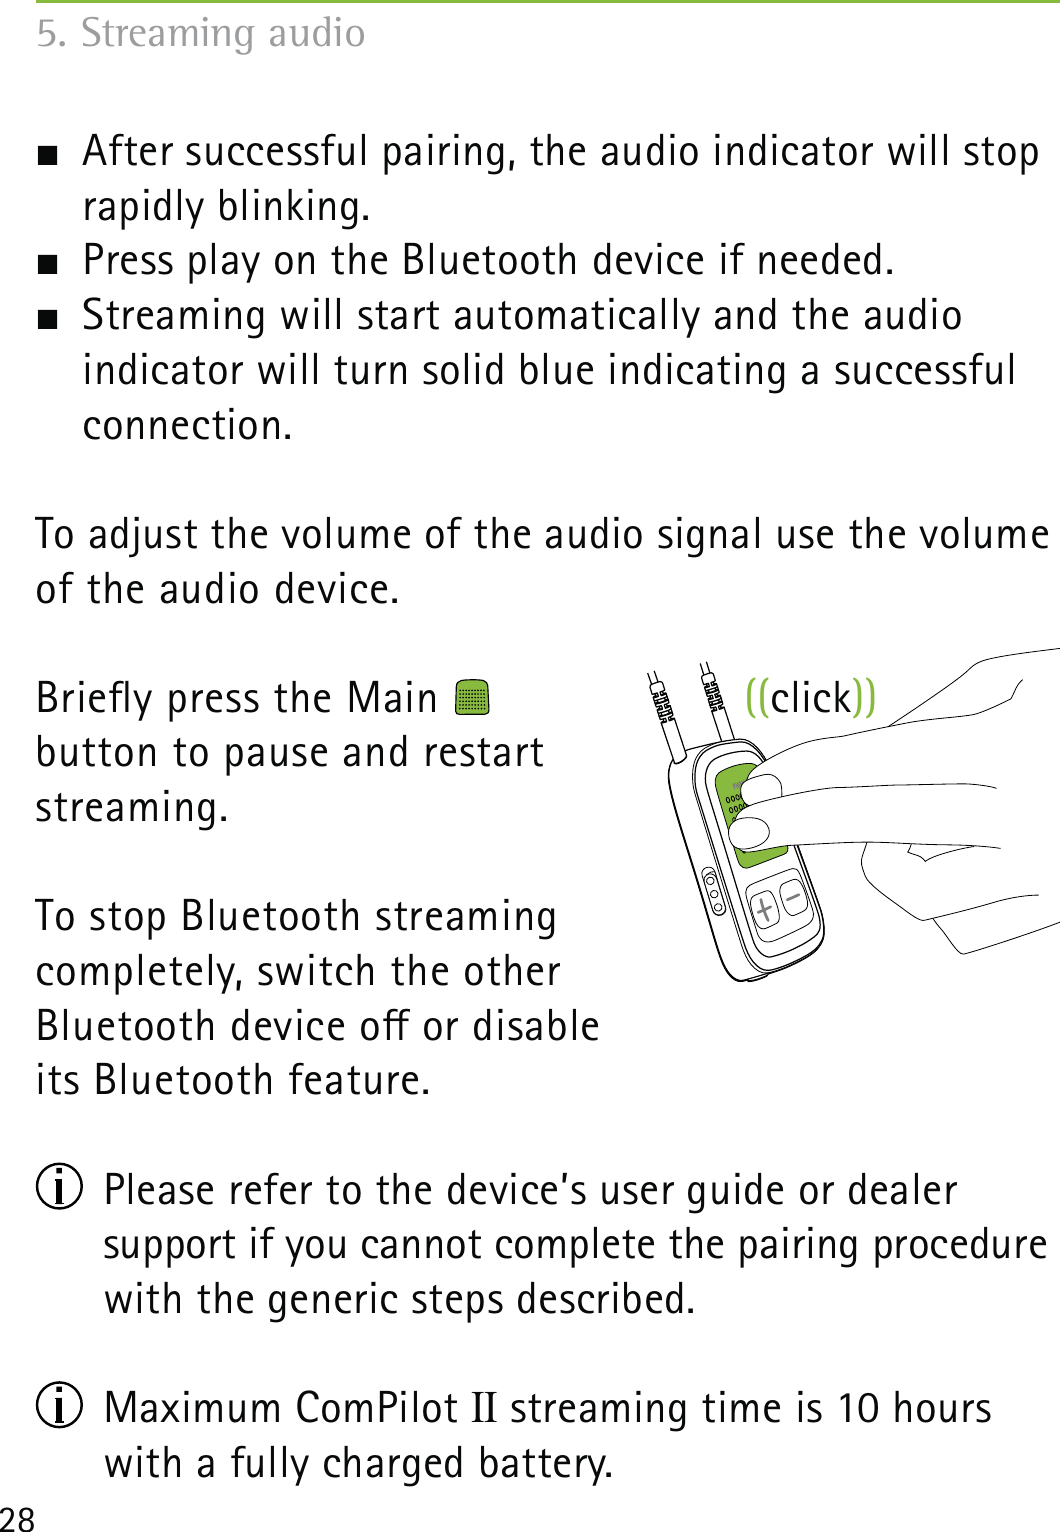 28  After successful pairing, the audio indicator will stop rapidly blinking.  Press play on the Bluetooth device if needed.  Streaming will start automatically and the audio  indicator will turn solid blue indicating a successful connection.To adjust the volume of the audio signal use the volume of the audio device. Briey press the Main    button to pause and restart  streaming.To stop Bluetooth streaming  completely, switch the other  Bluetooth device o or disable  its Bluetooth feature.  Please refer to the device’s user guide or dealer  support if you cannot complete the pairing procedure with the generic steps described. Maximum ComPilot II streaming time is 10 hours with a fully charged battery.5. Streaming audio((click))